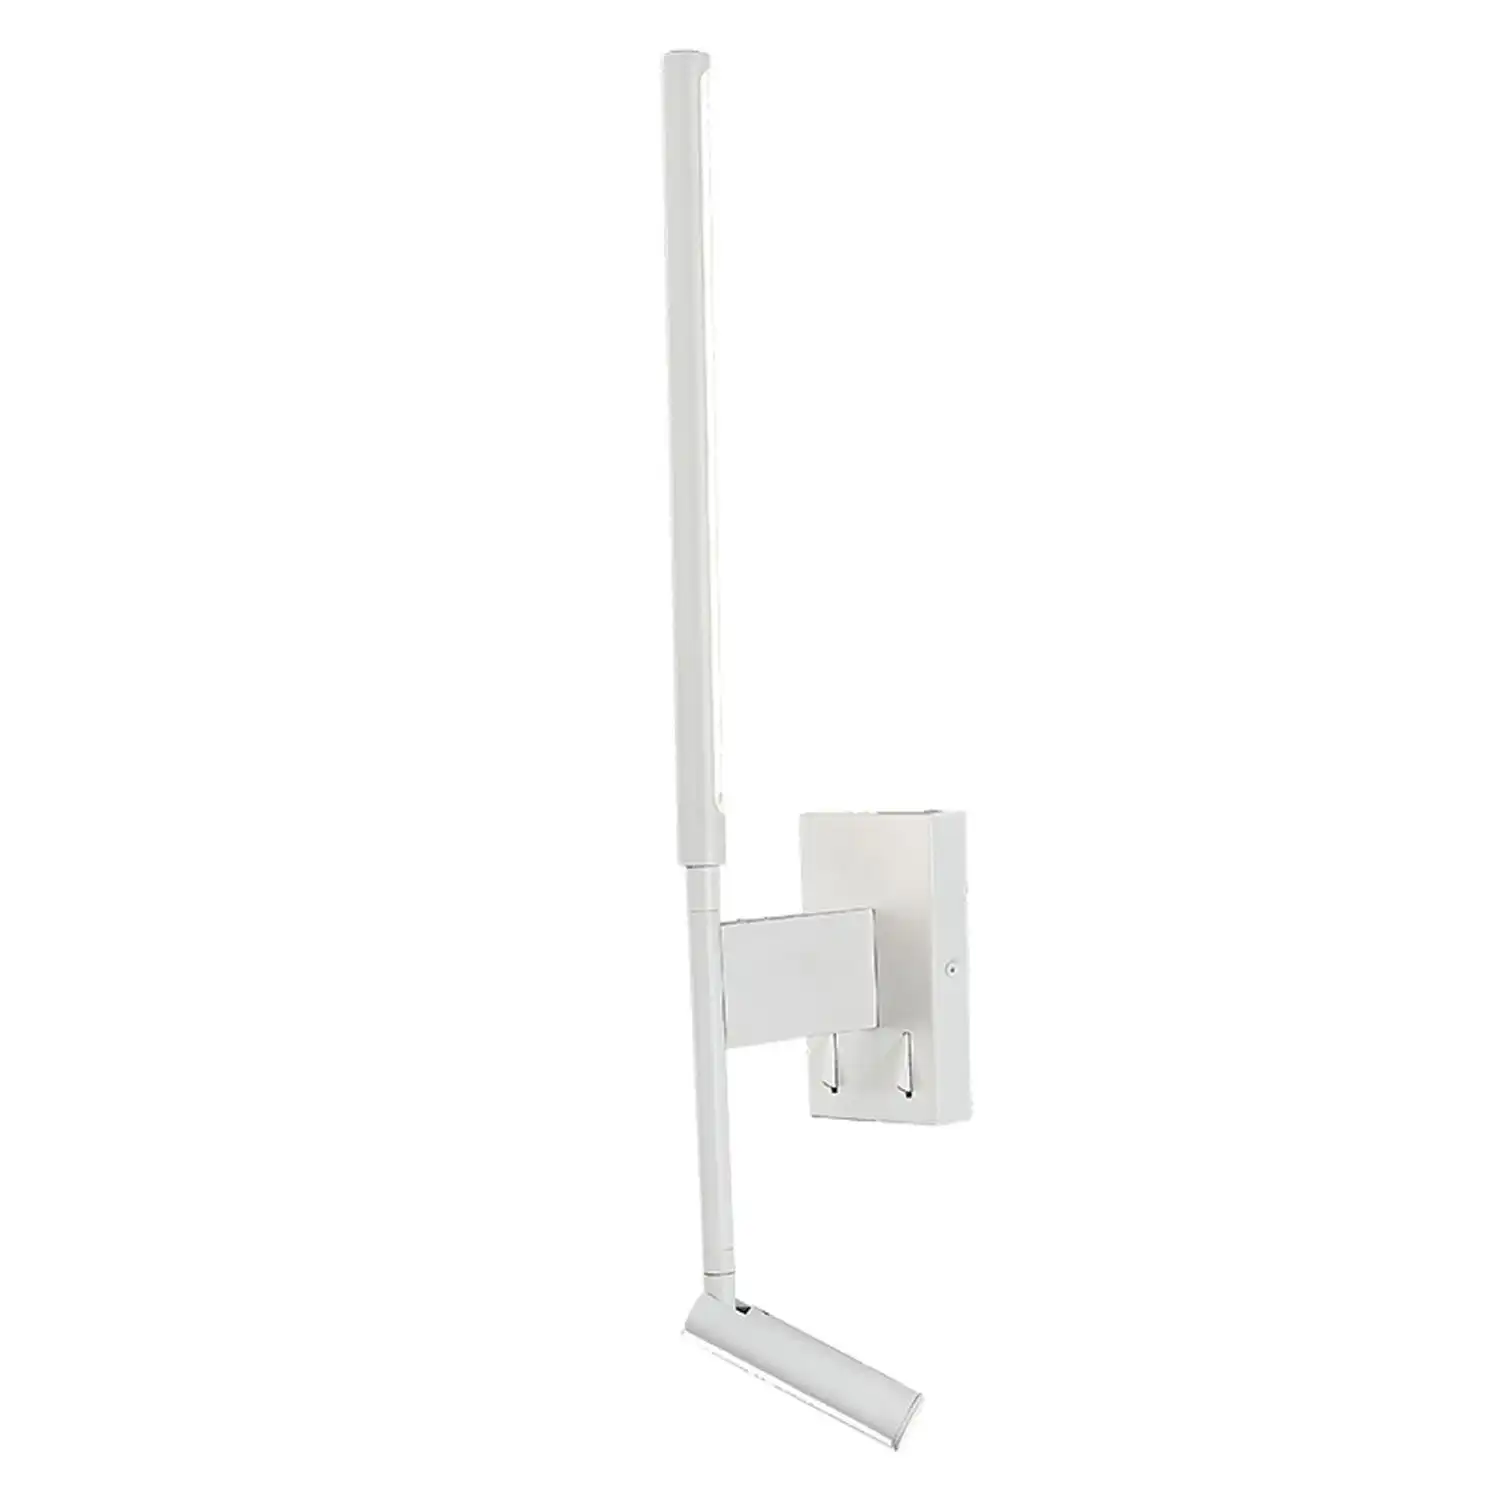 Torch Wall Plus Reading Light, 6W Plus 3W LED, 3000K, 592lm Total, Individually Switched, Sand White, 3yrs Warranty